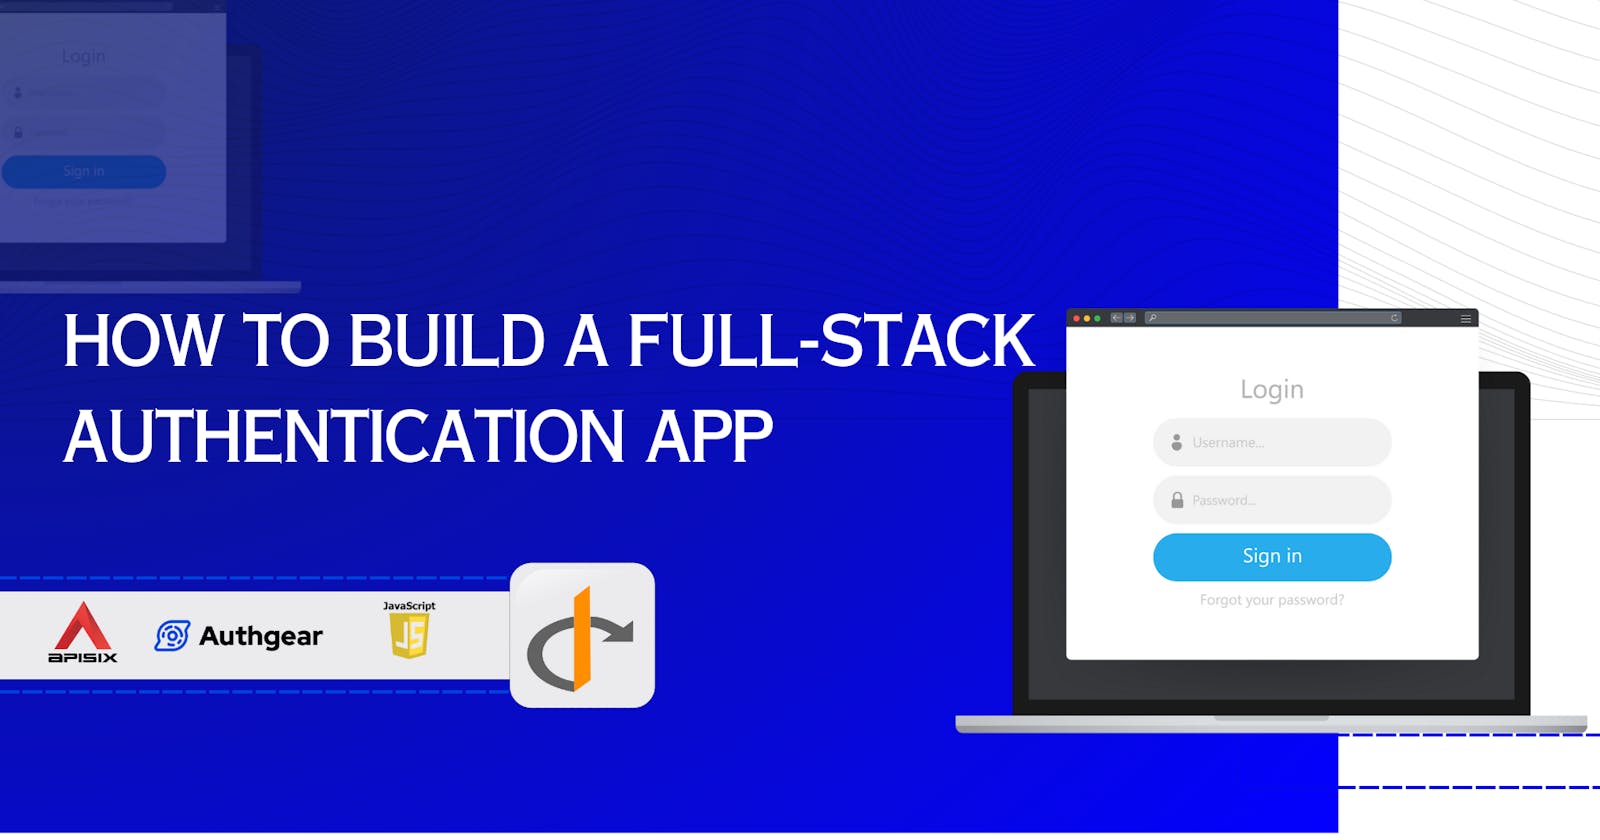 How to build a full-stack authentication app